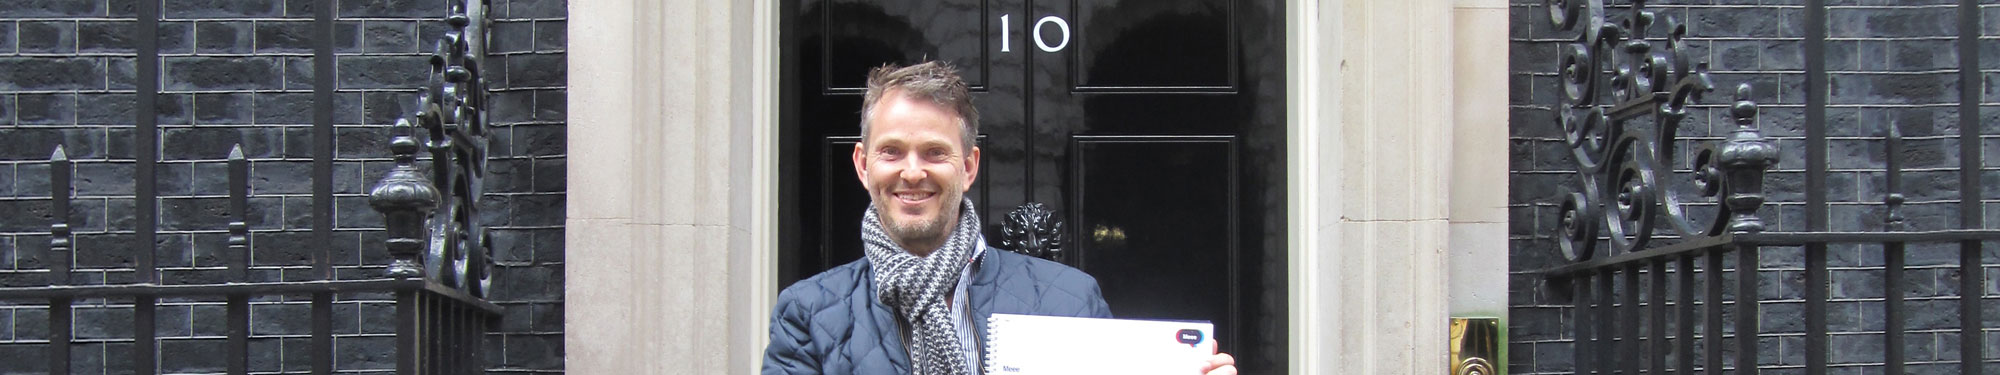 Sid outside 10 Downing Street